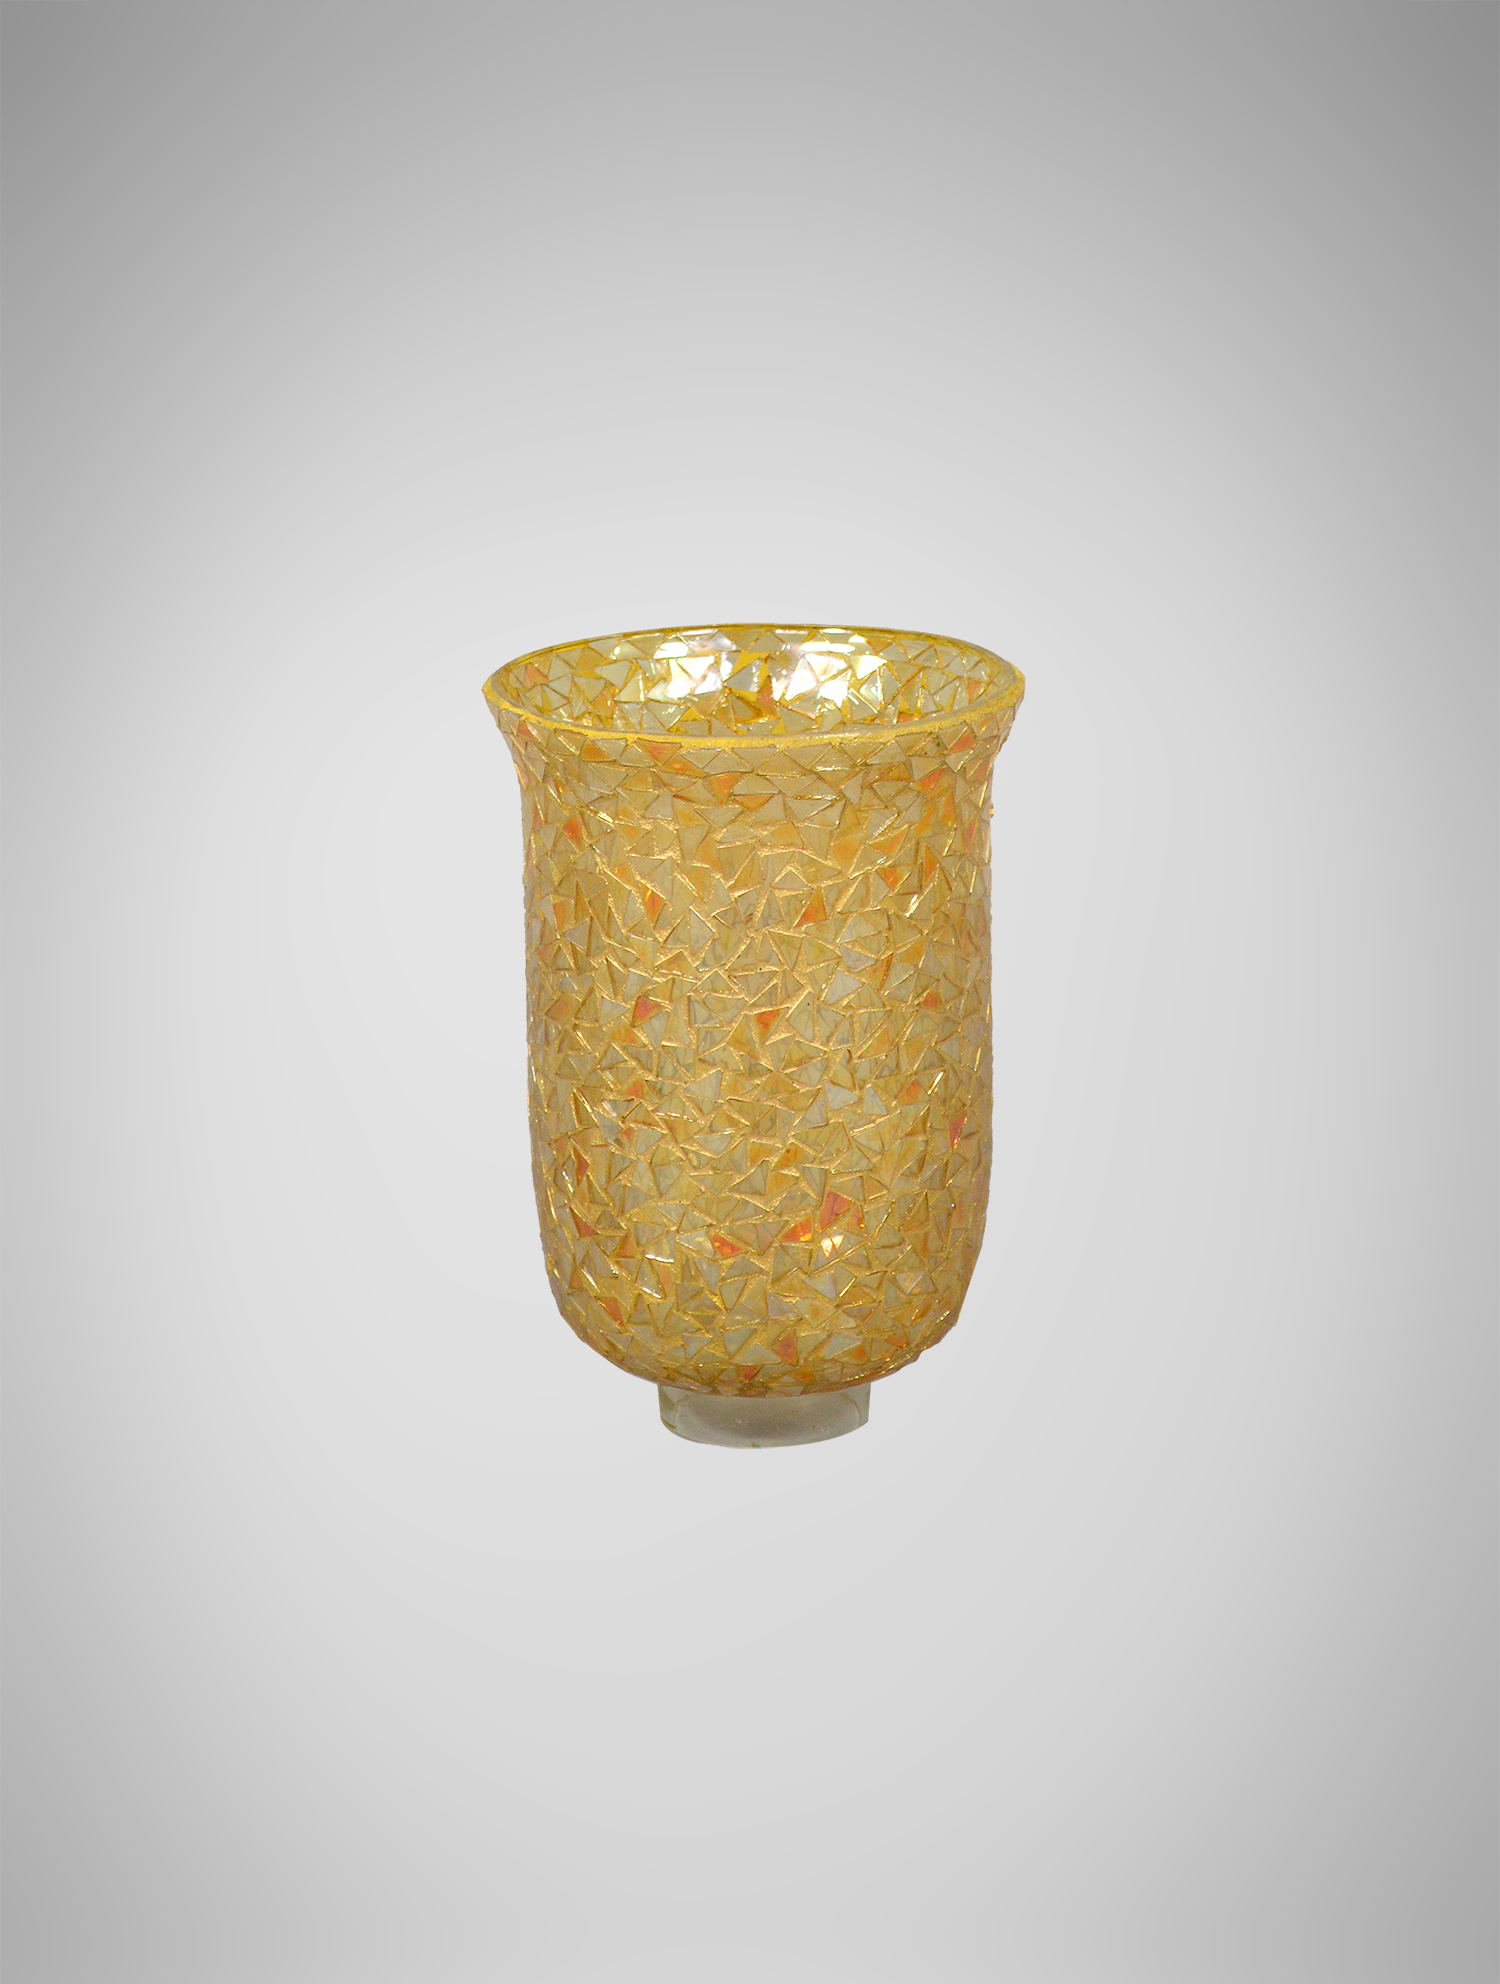 Gold Mosaic Candle Holder - West Coast Event Productions, Inc.